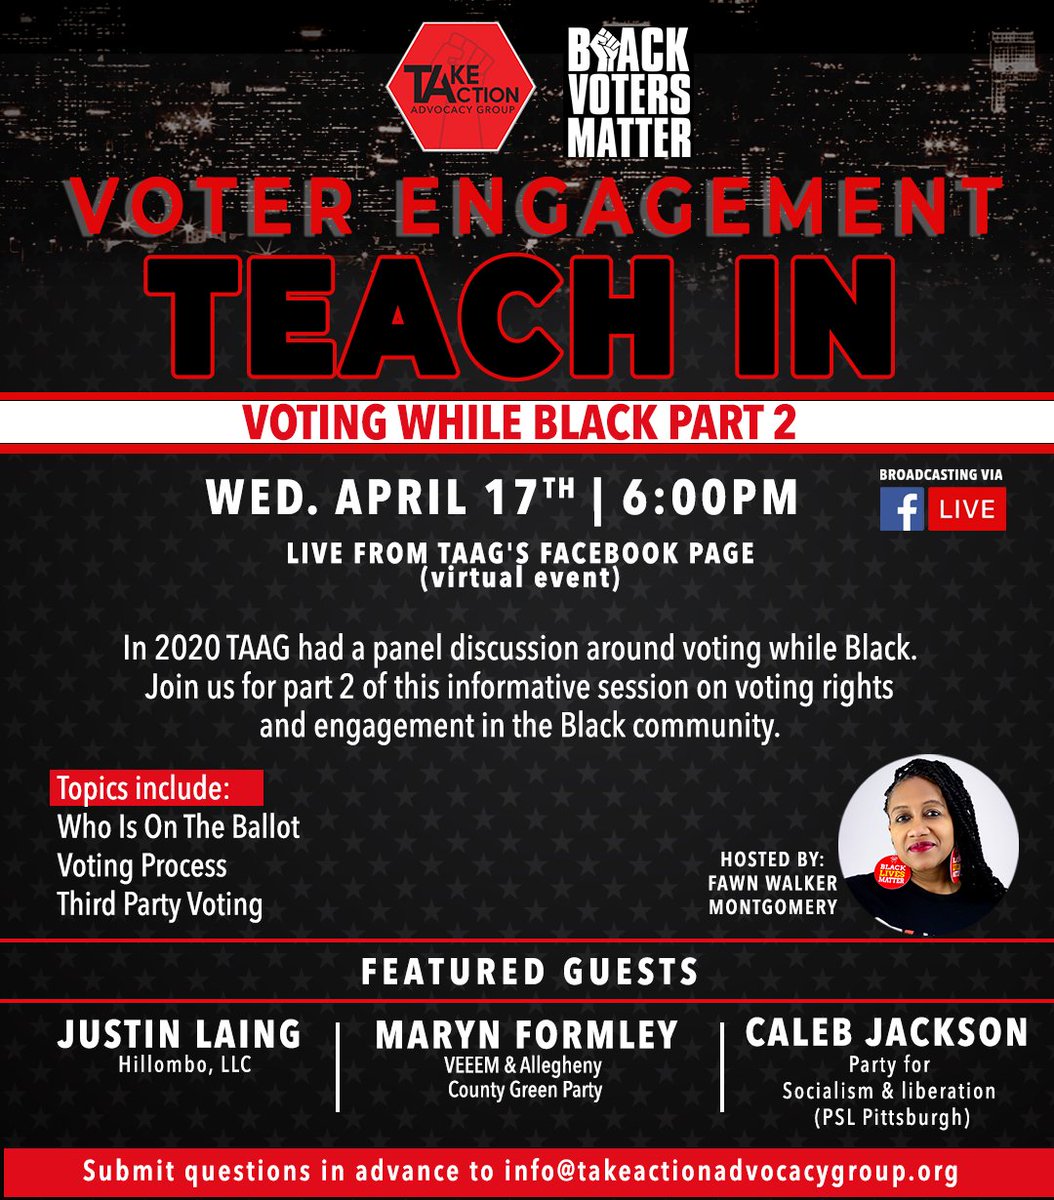 Don't miss out on Voting While Black! Join us TODAY to discuss who's on the ballot, voting process, and the role of third-party voting. Your voice matters - be informed and empowered! Email info@takeactionadvocacygroup.org to submit your questions in advance. #VotingWhileBlack